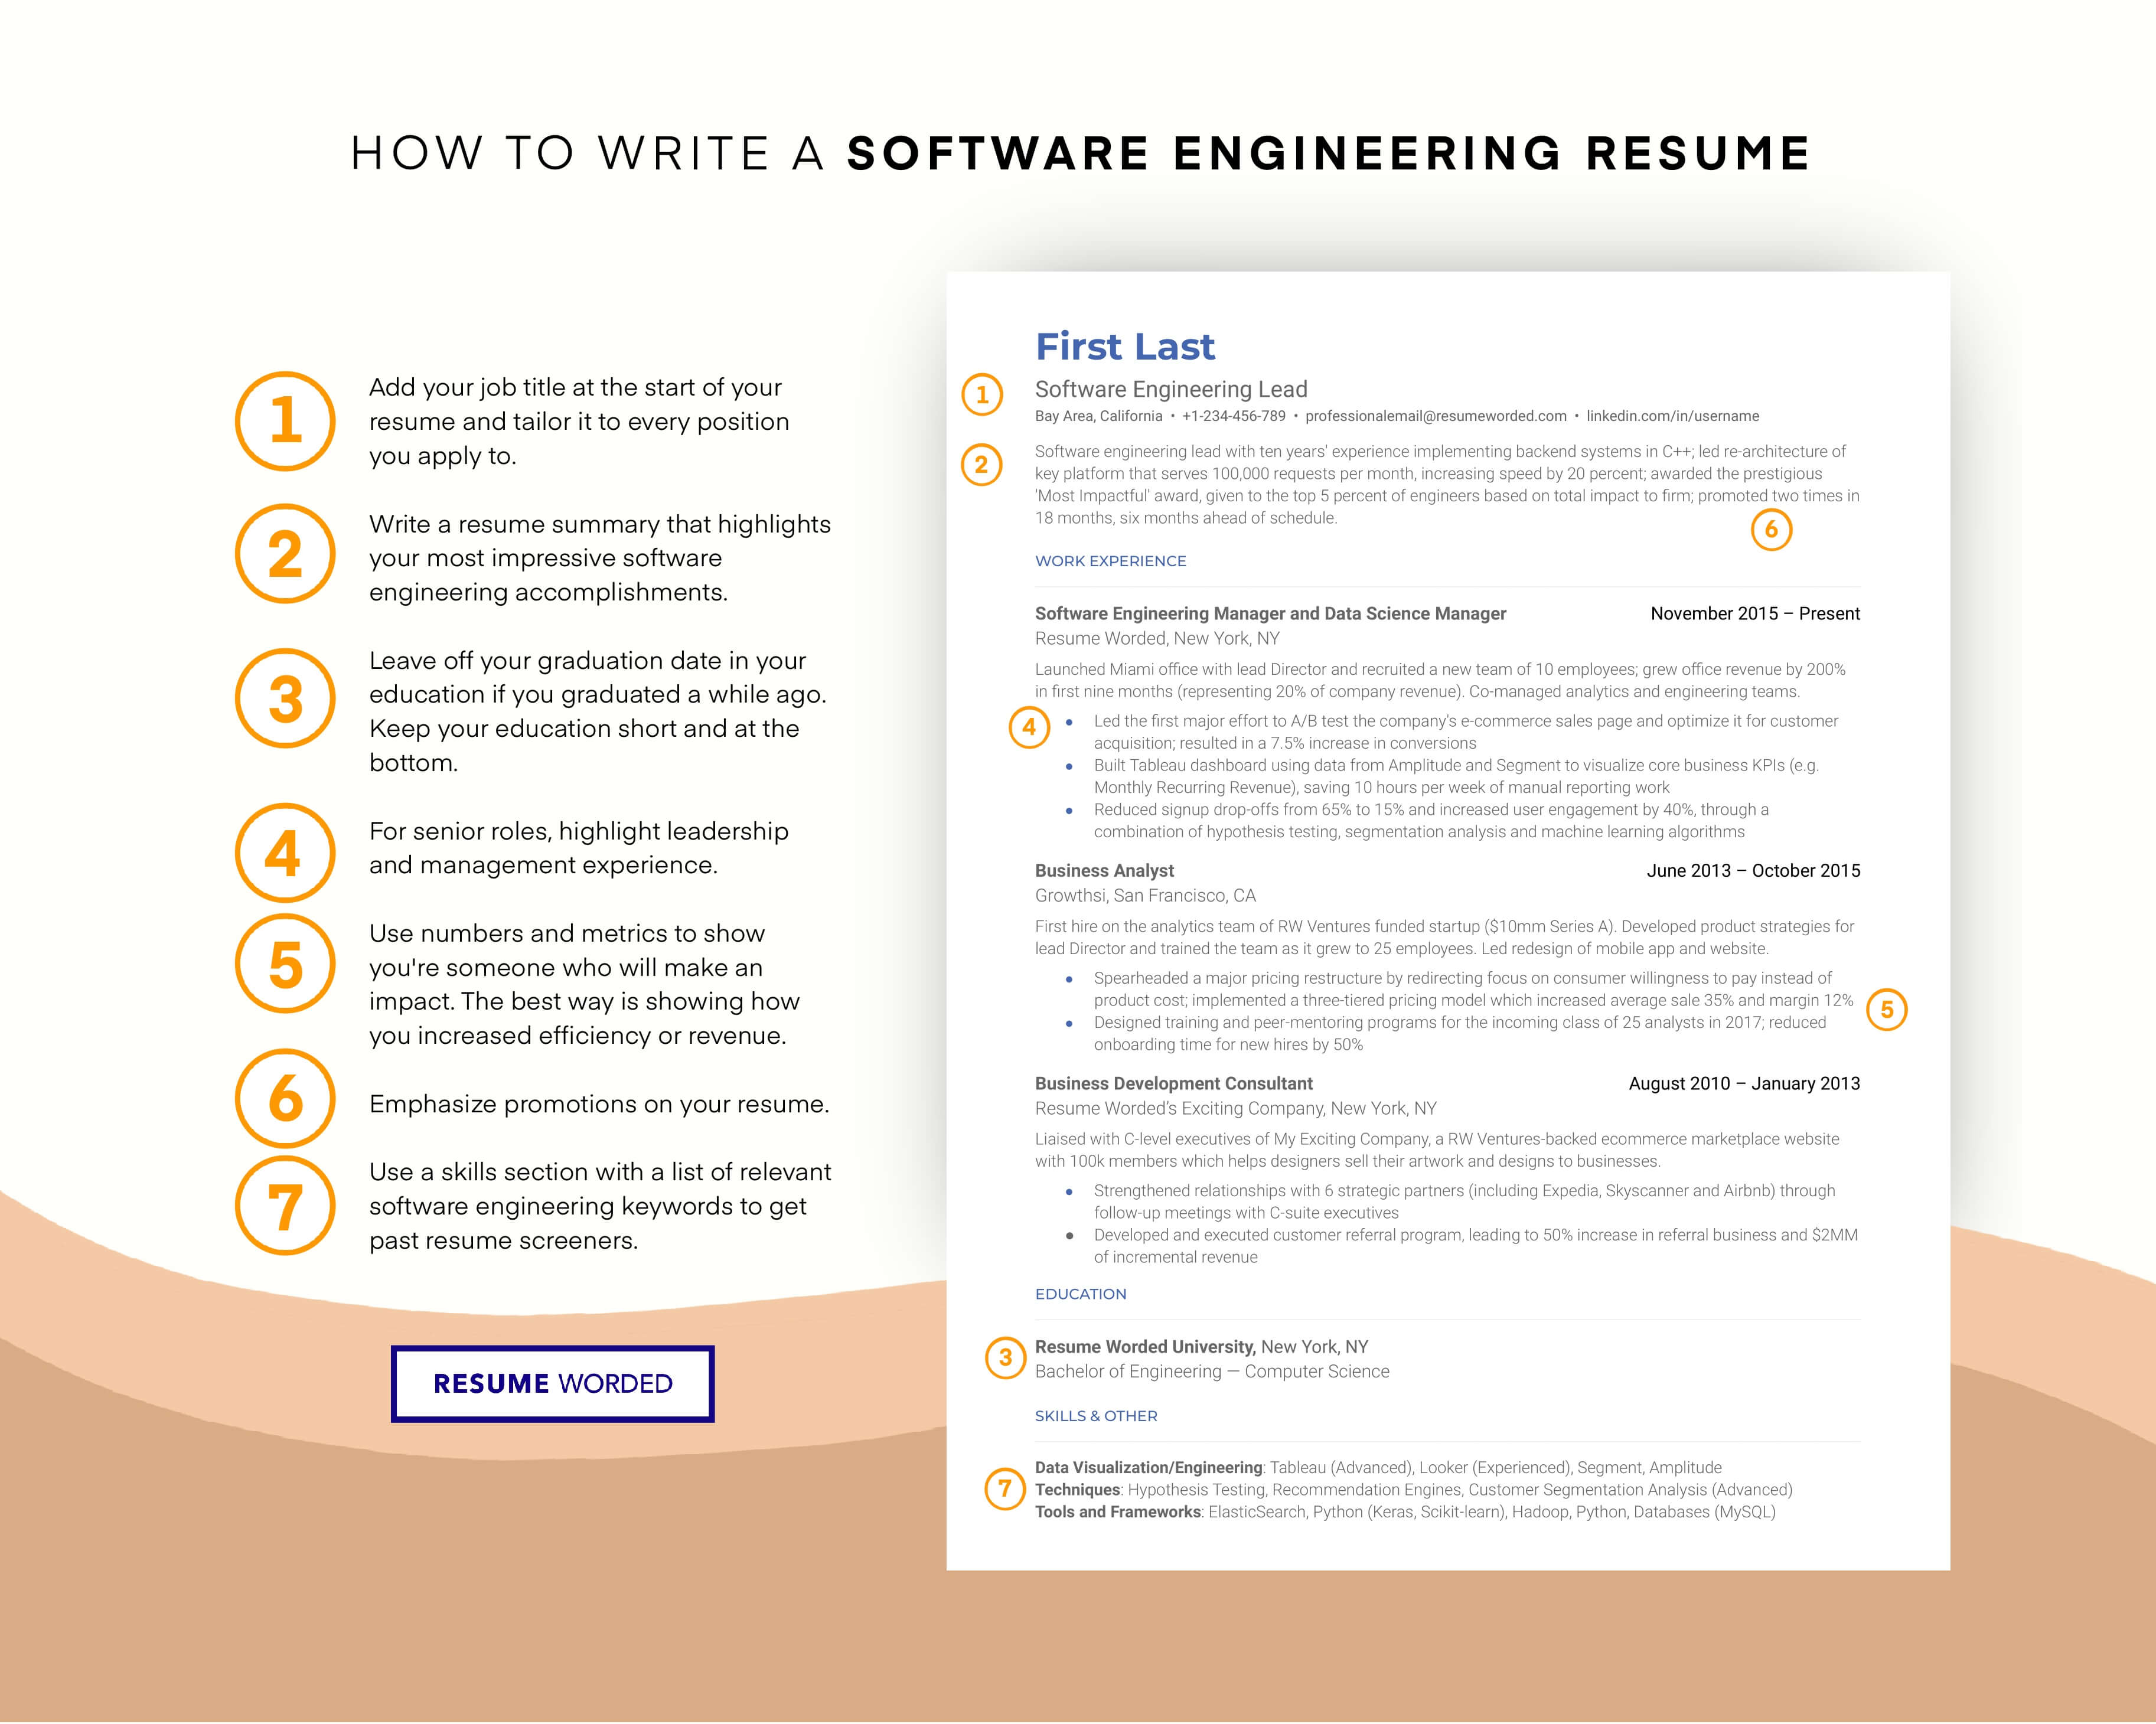 Highlight proficiency in biomedical software - Technical Biomedical Engineer Resume